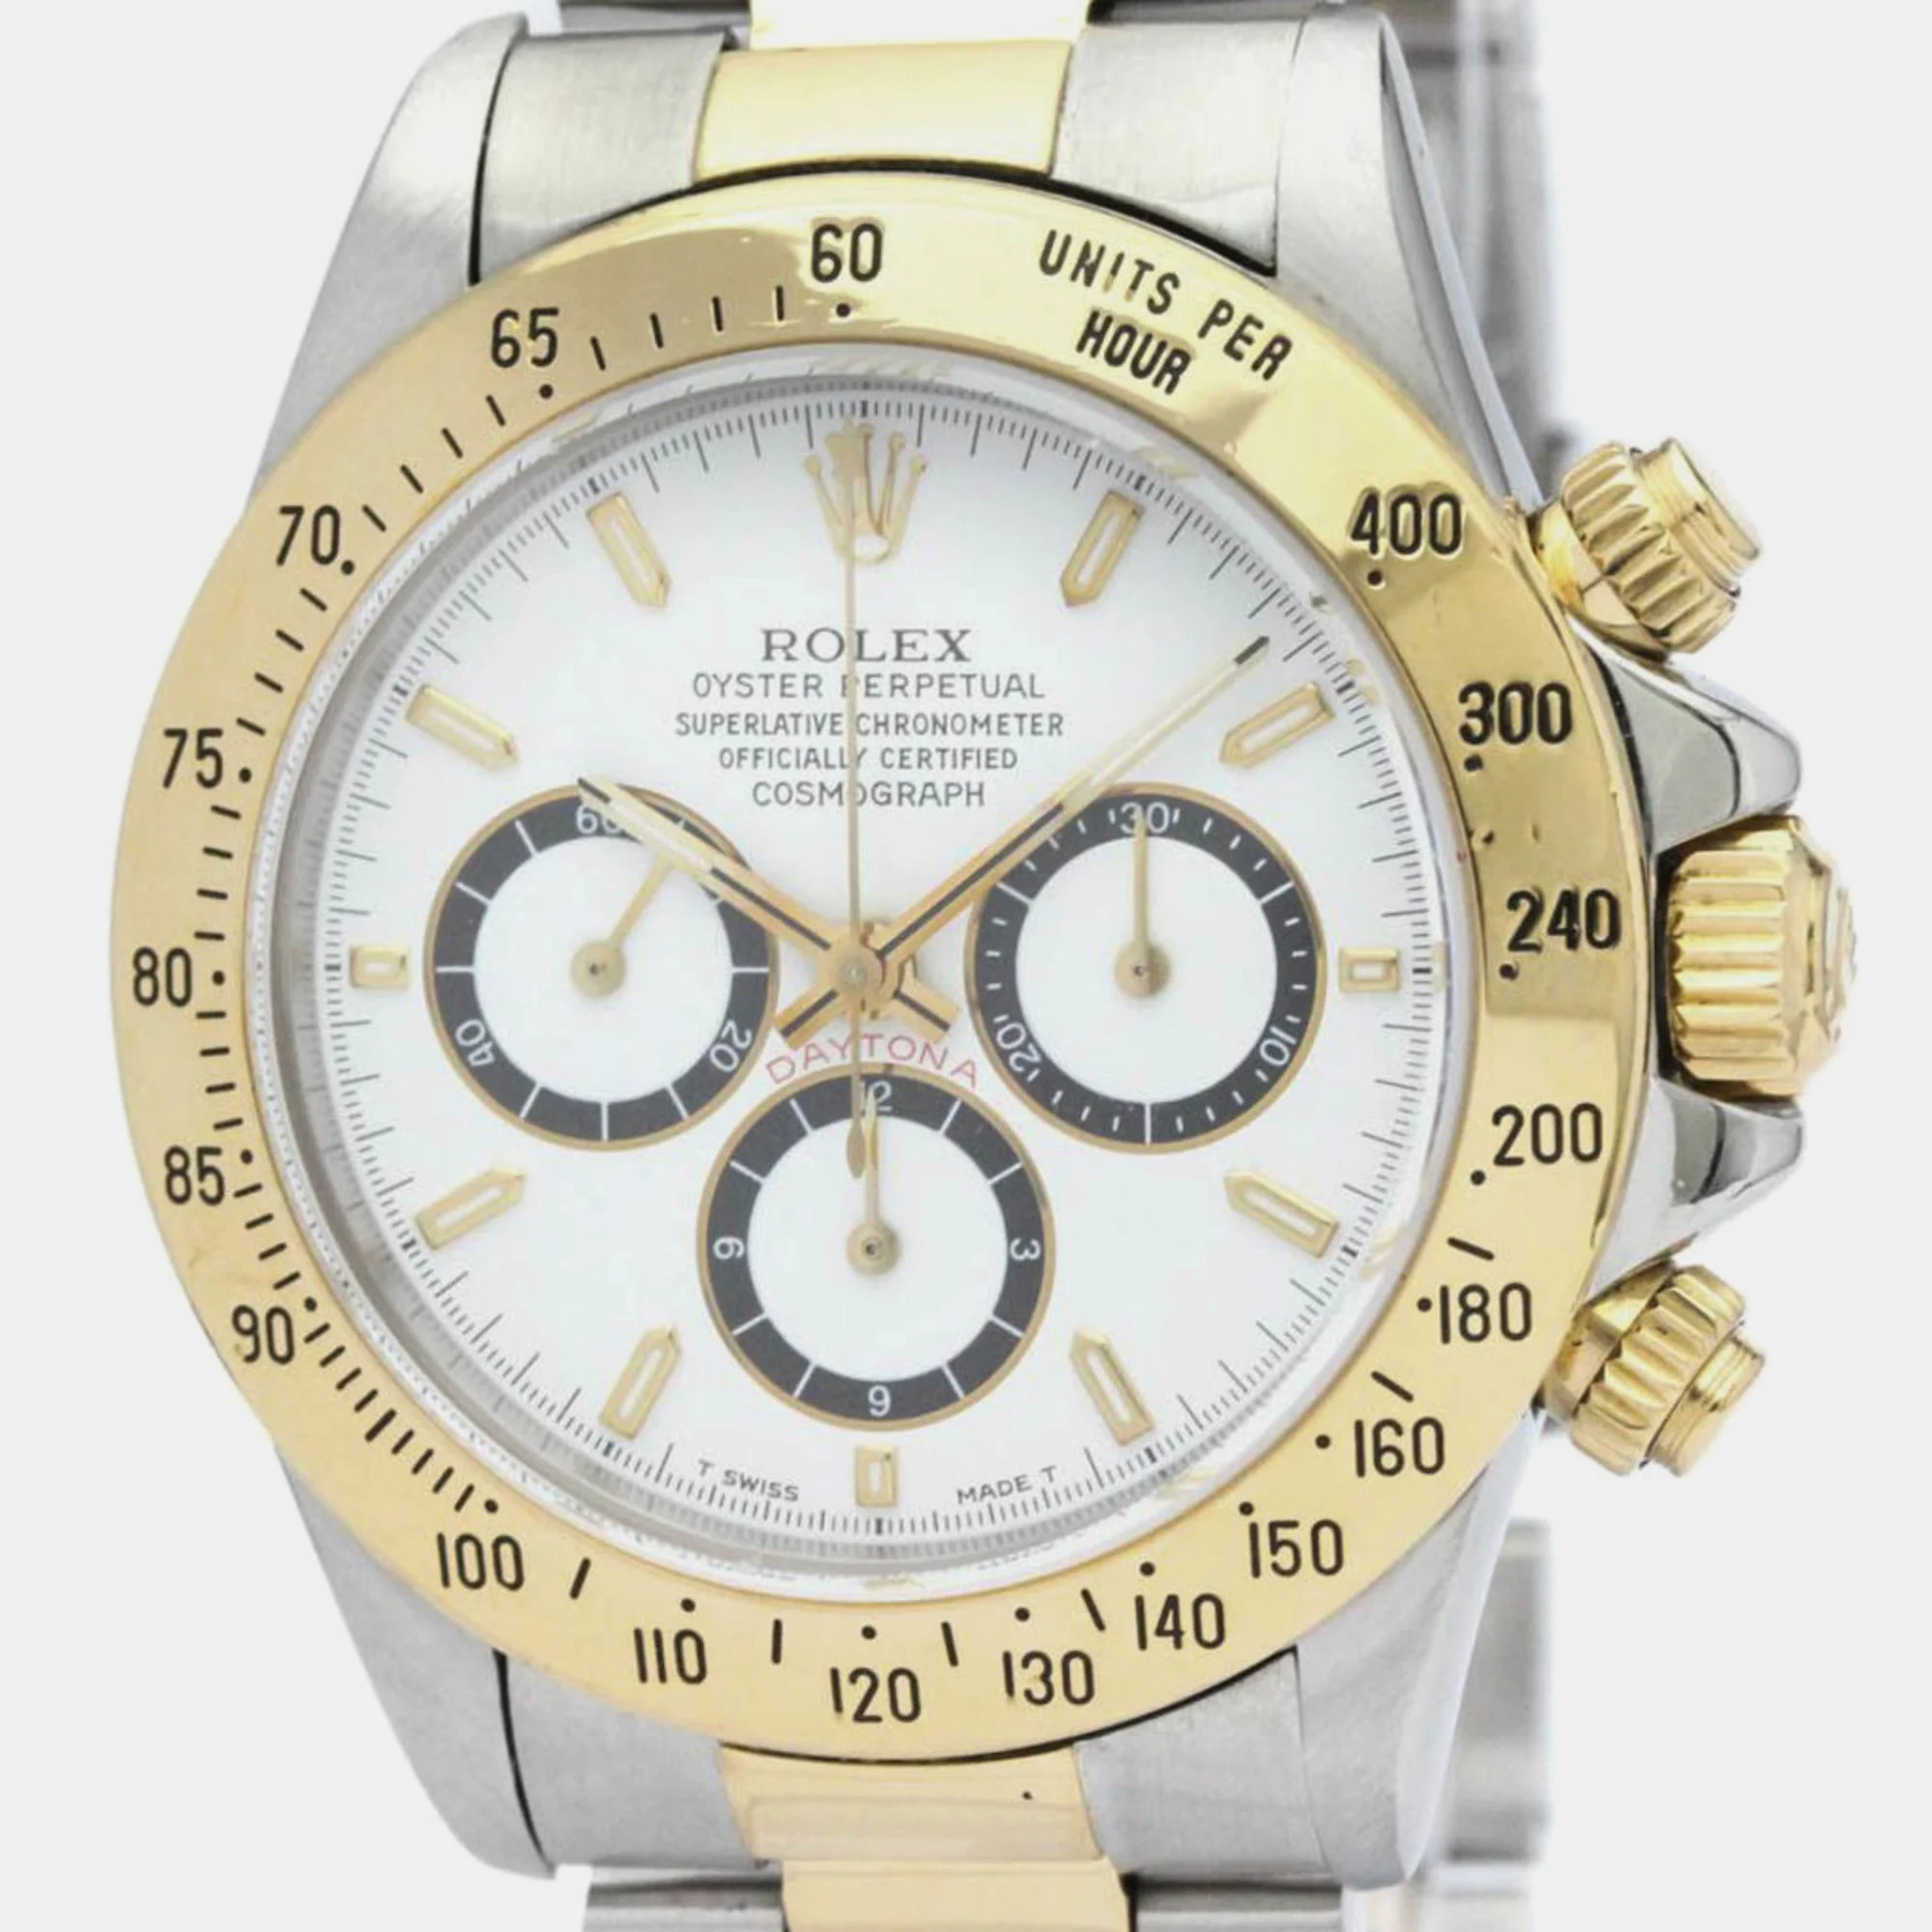 Rolex White 18k Yellow Gold And Stainless Steel Cosmograph Daytona 16523 Automatic Men's Wristwatch 40 Mm